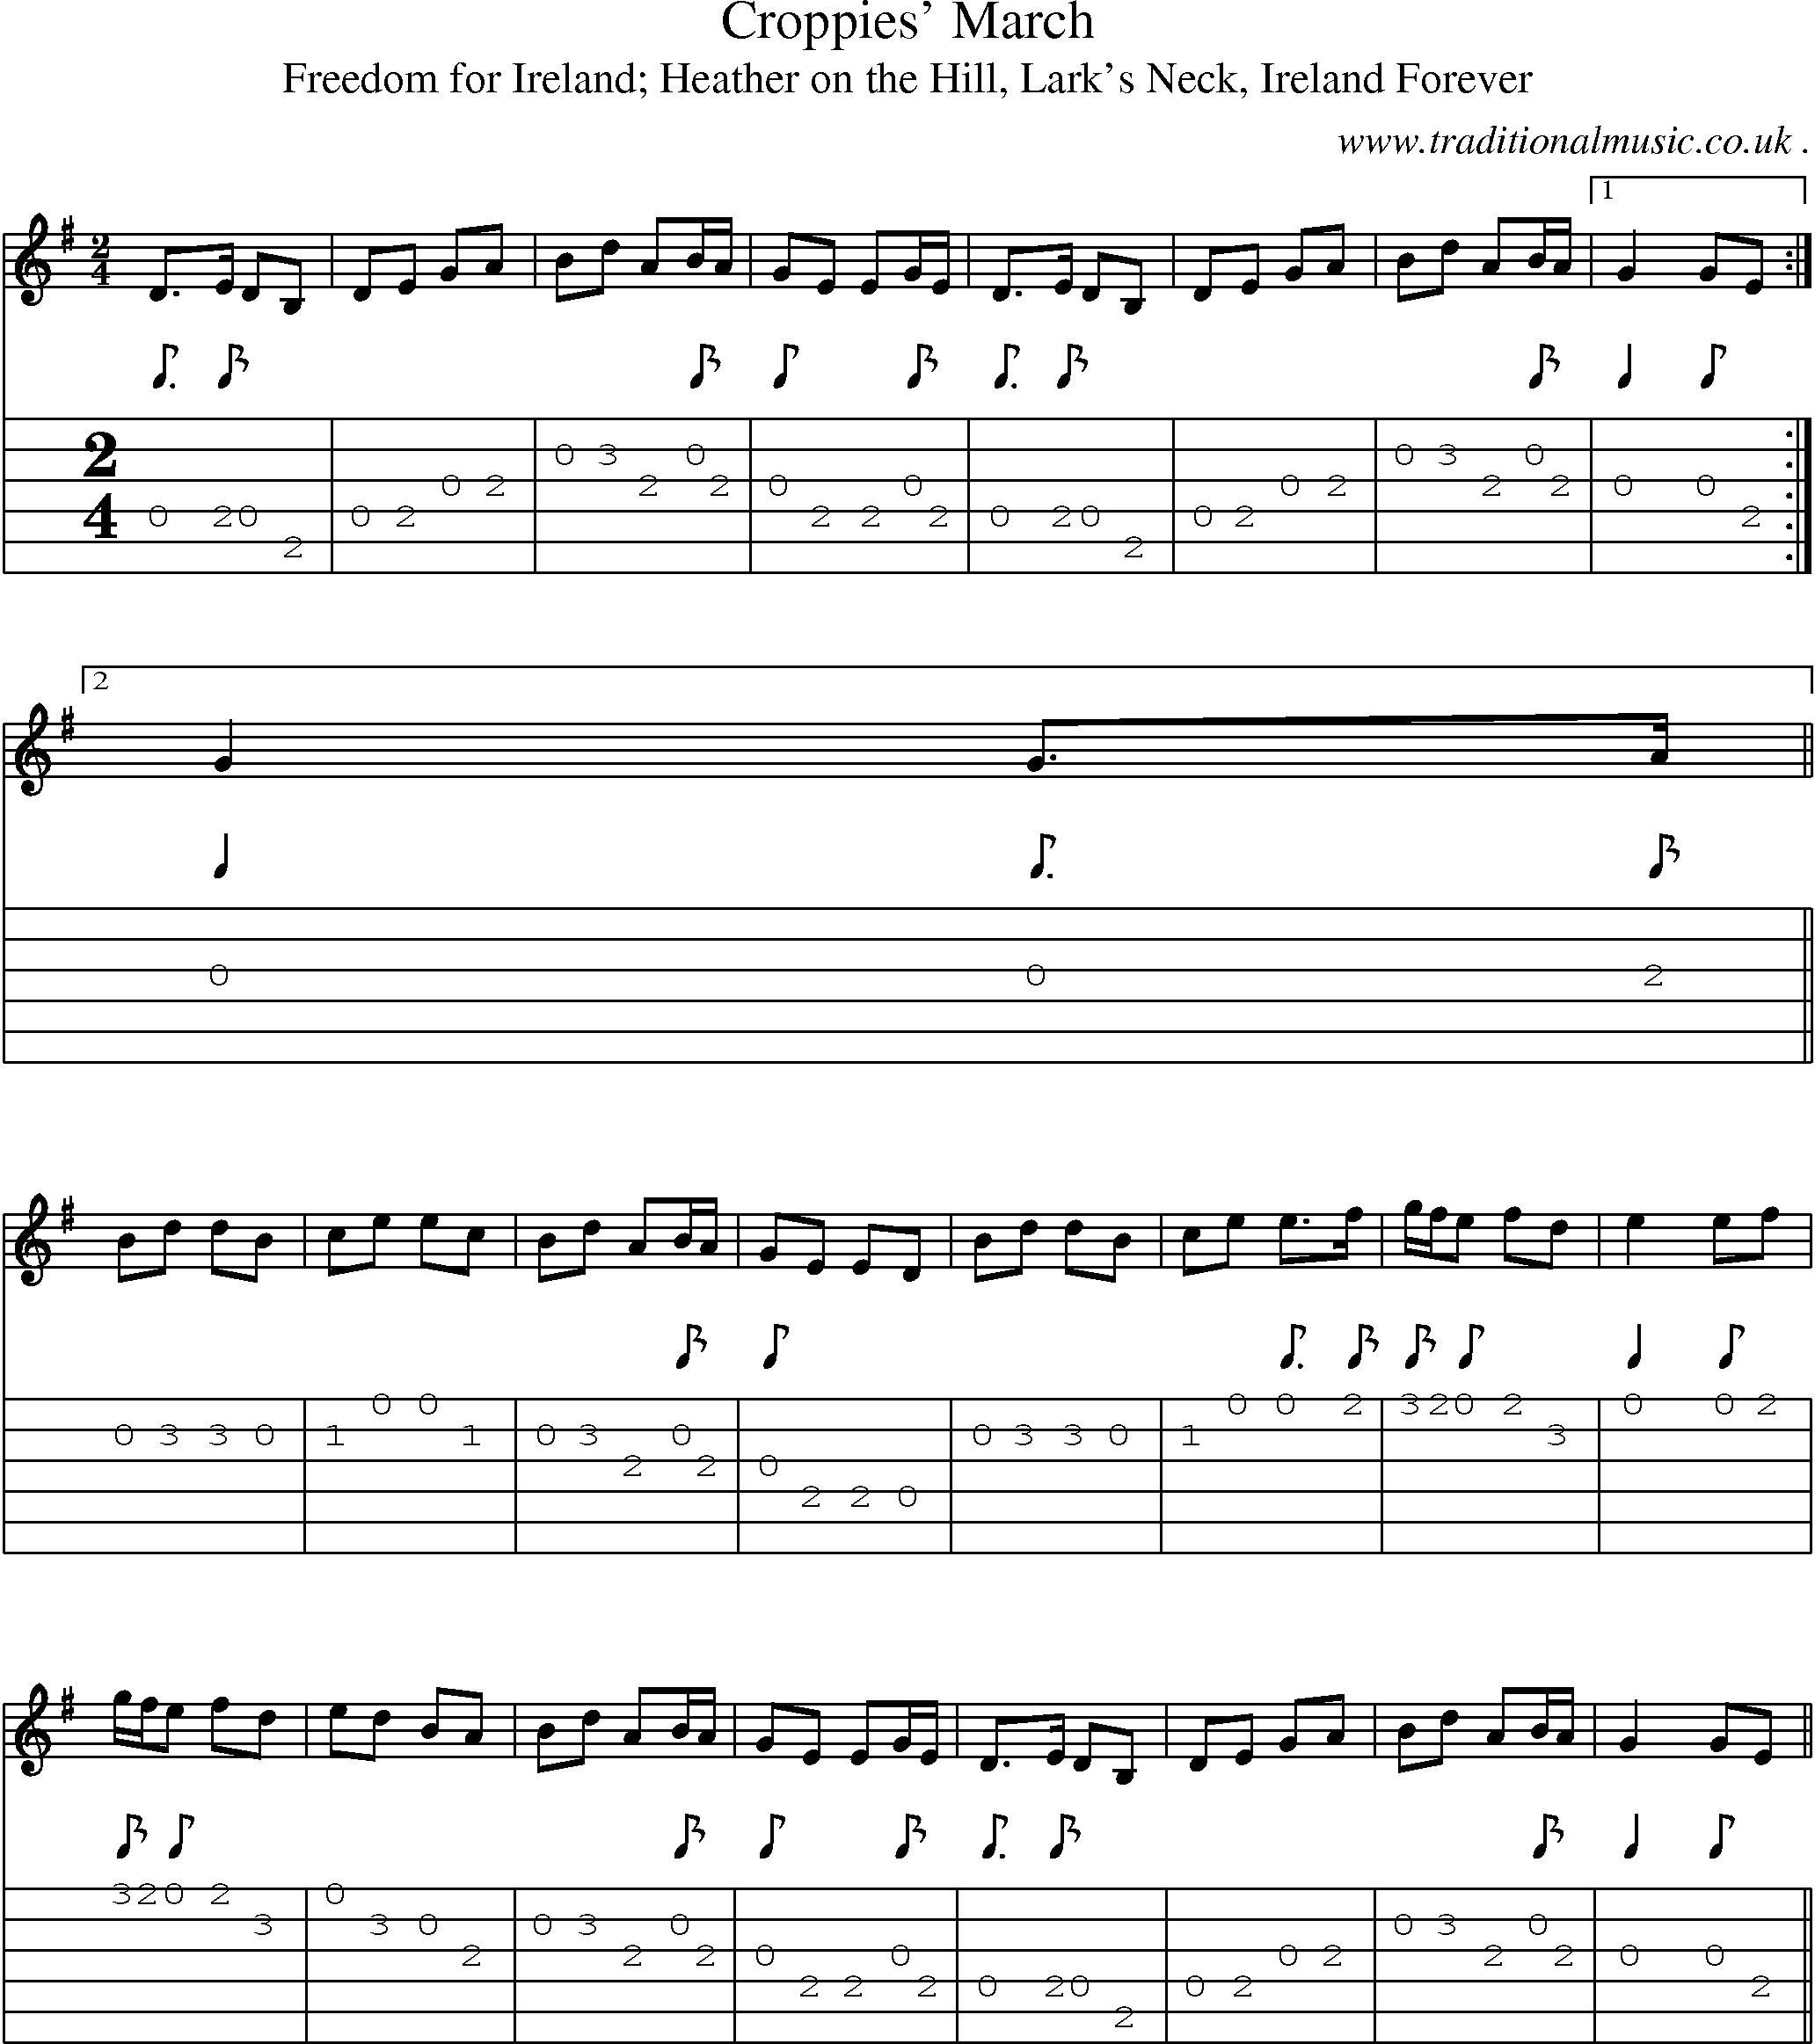 Sheet-Music and Guitar Tabs for Croppies March